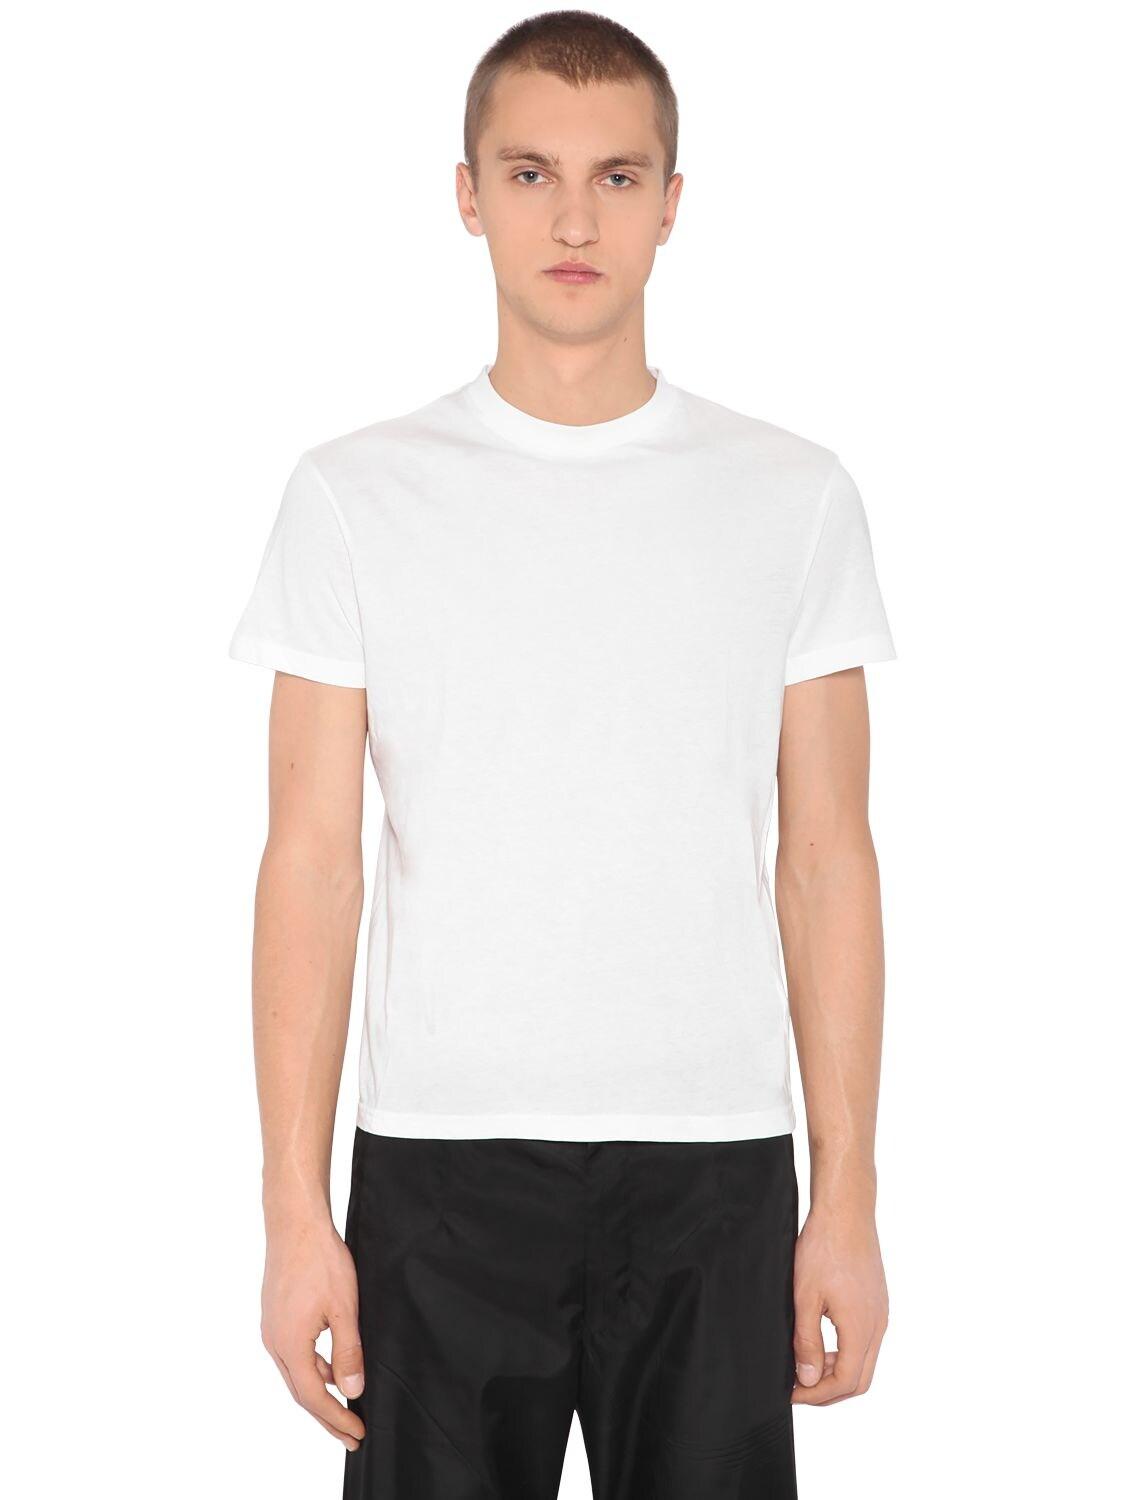 Prada 3 Pack Cotton Jersey T-shirts in White for Men - Save 24% - Lyst